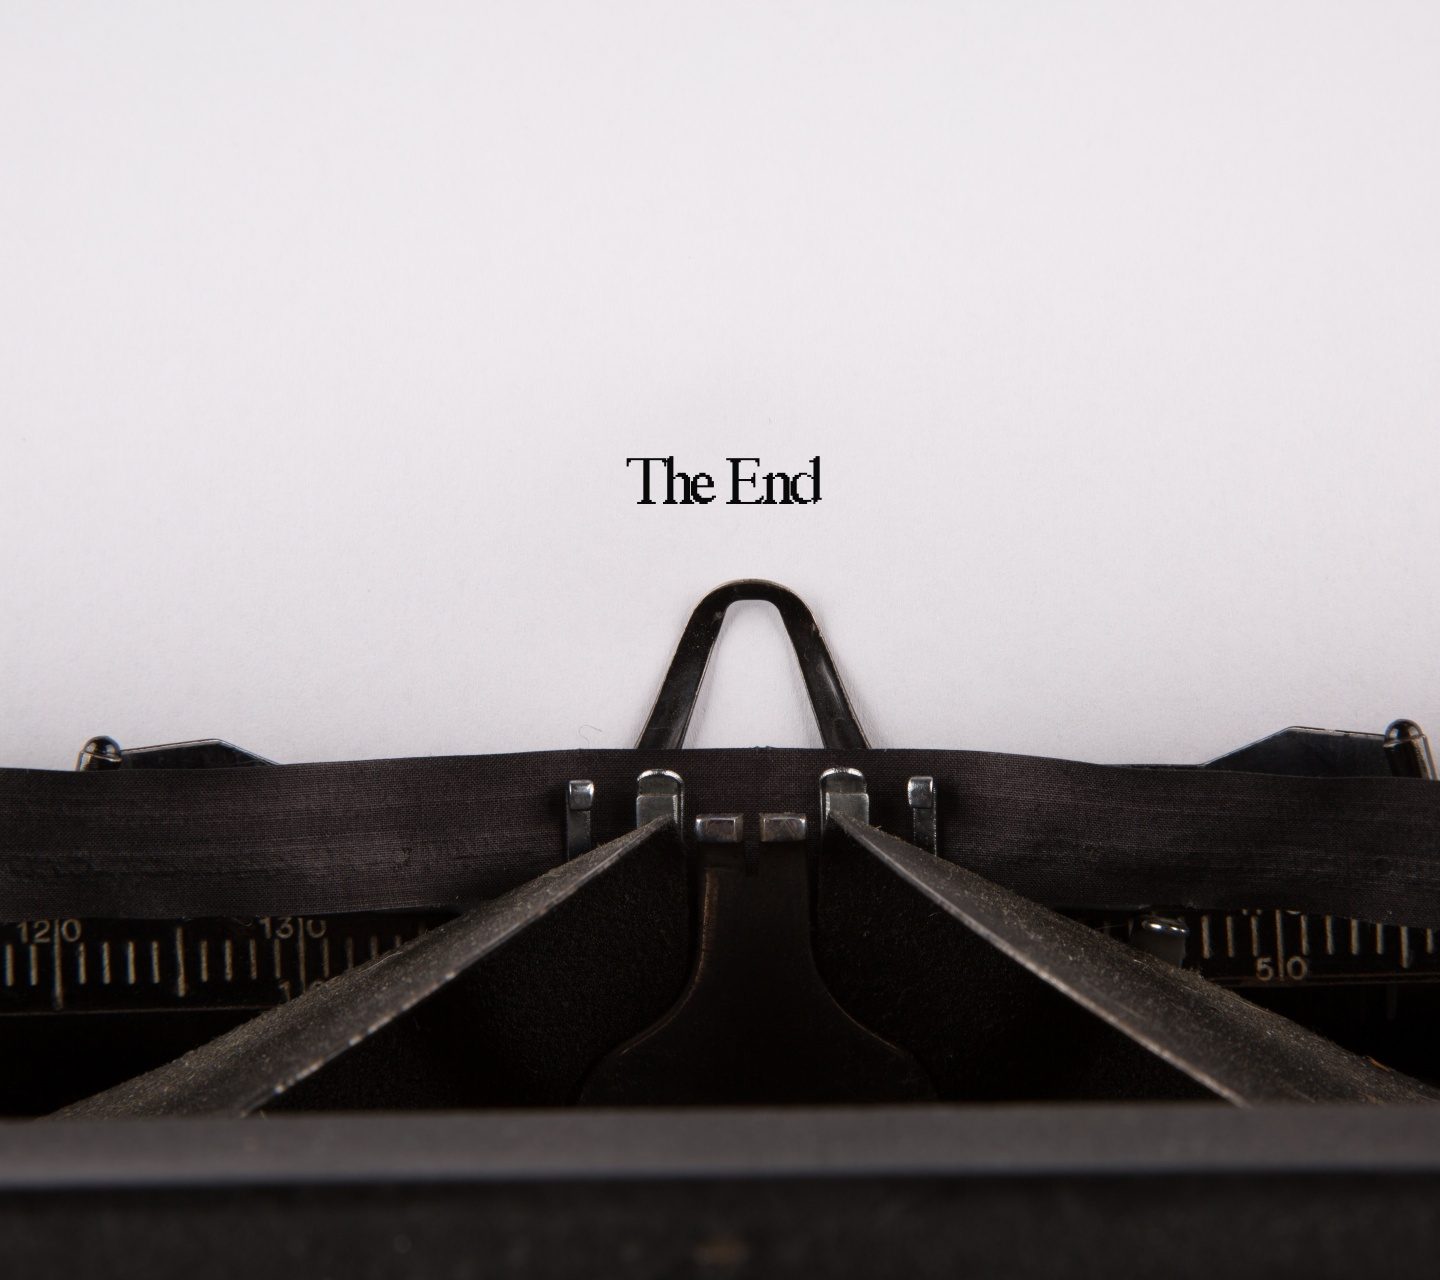 My Fourth Novel, In My Time of Dying, is Finished!